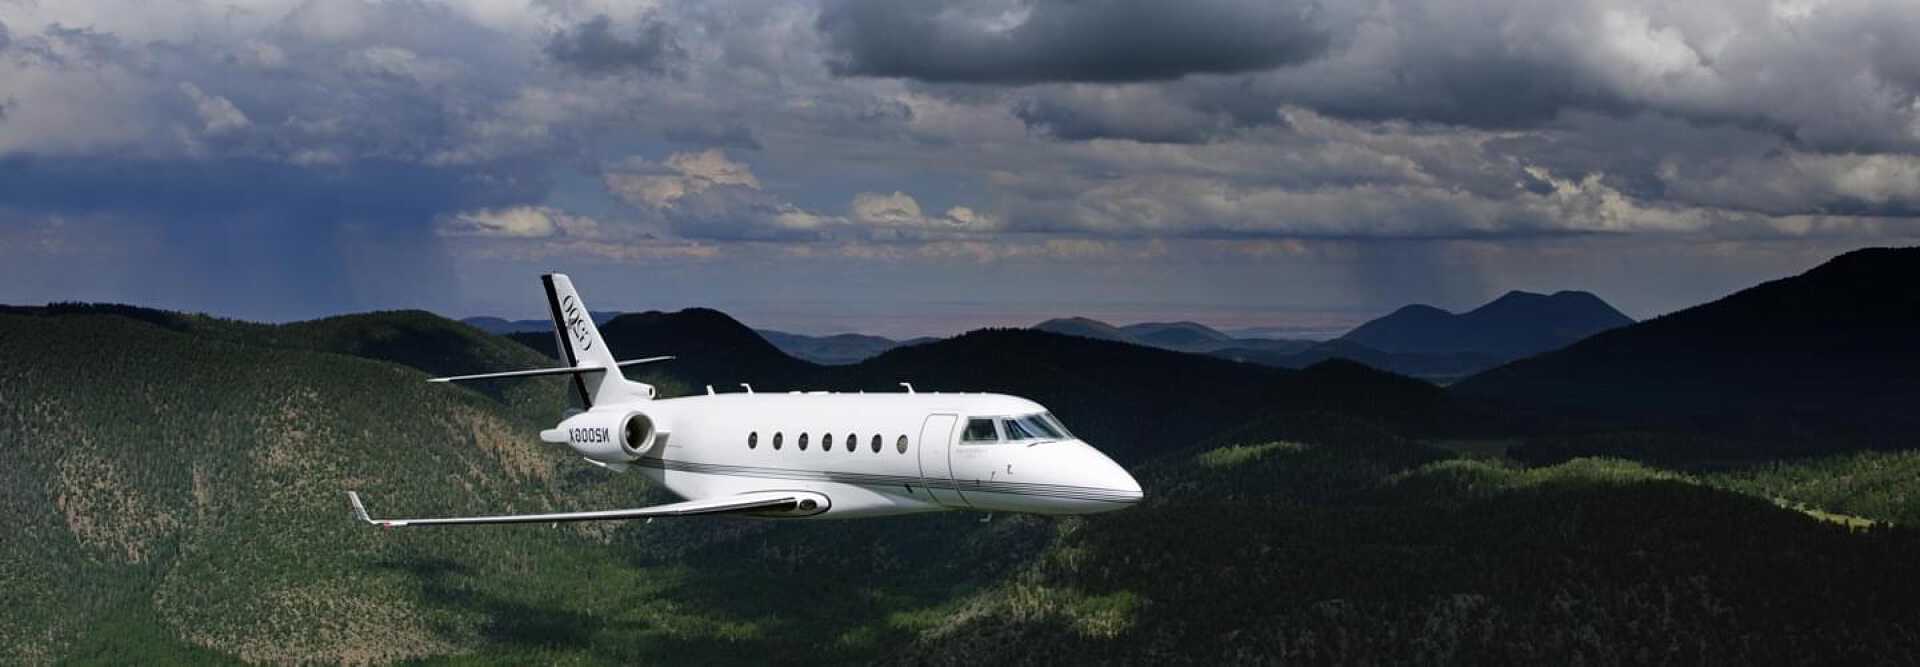 Midsize Jet Gulfstream G200 to charter for private aviation flights with LunaJets  for medium-haul journeys, combining performance and comfort